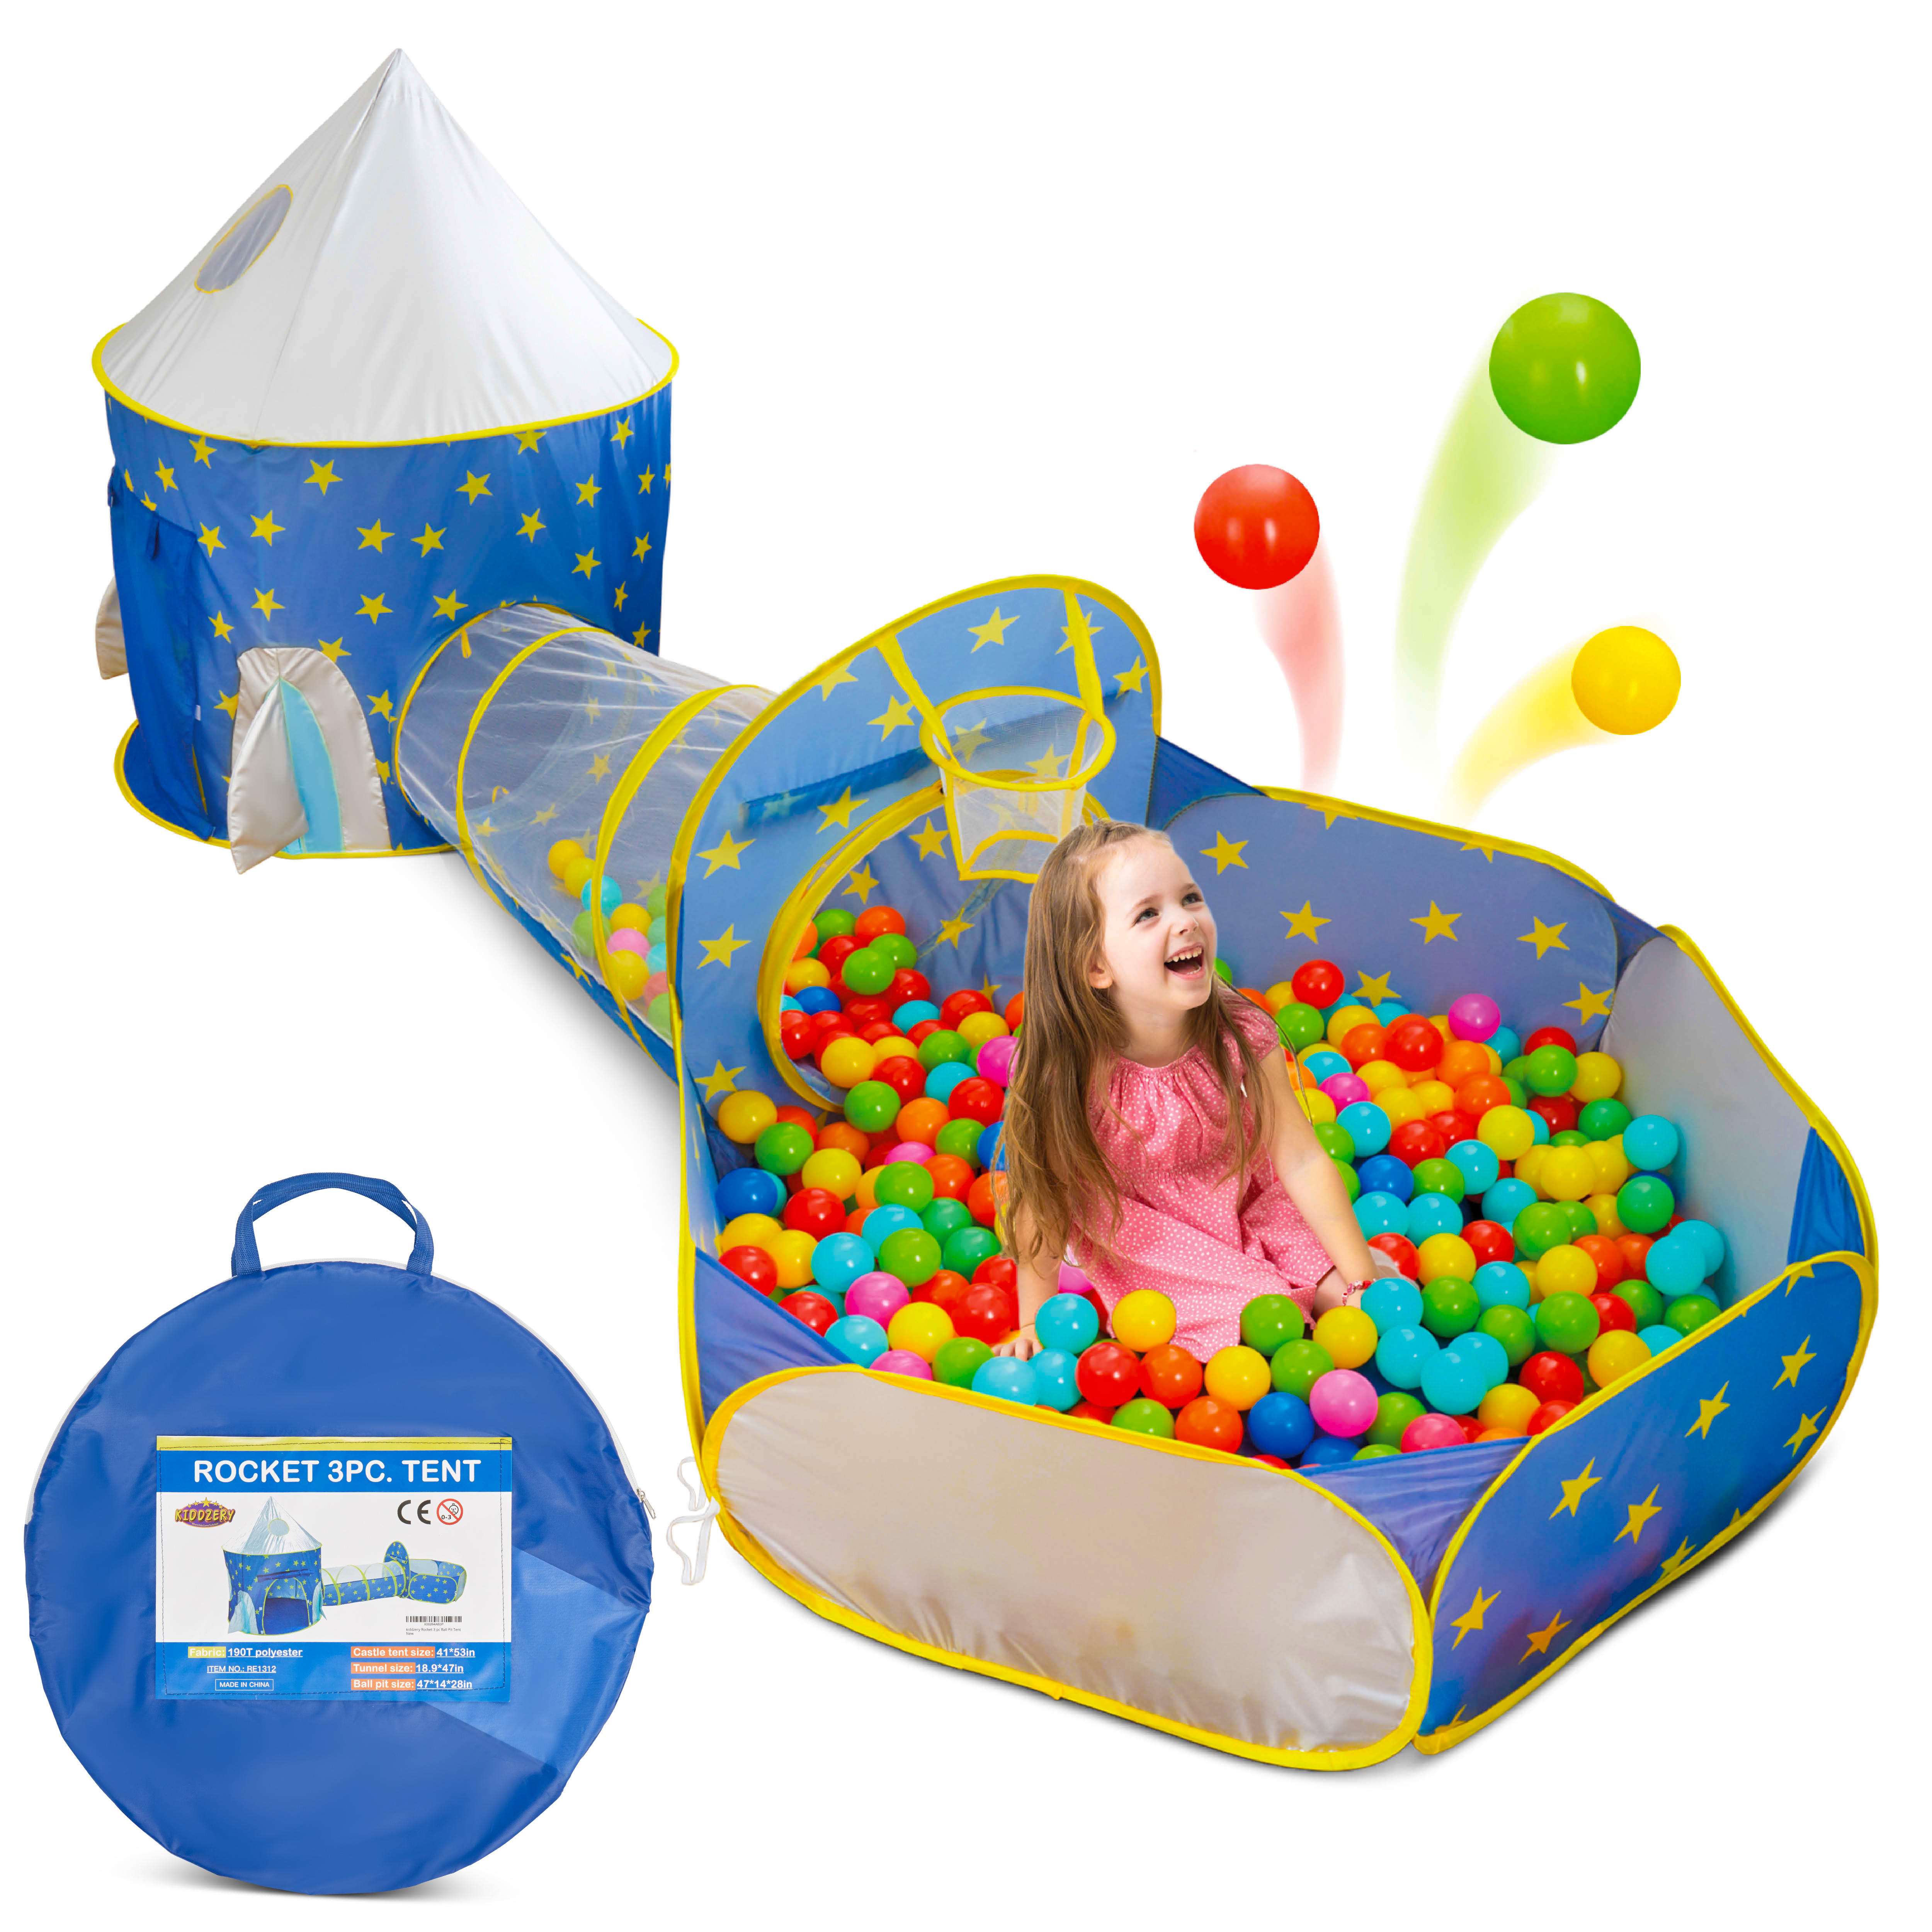 3-Piece Set Lightweight Easy to Setup Children/’s Pool Tent Ball Pit Pop Up Play House with Tunnel and Basket Ball Hoop Indoor//Outdoor Toys for Kids Toddlers Baby Boys Girls 1 2 3 4 5 6 Years old